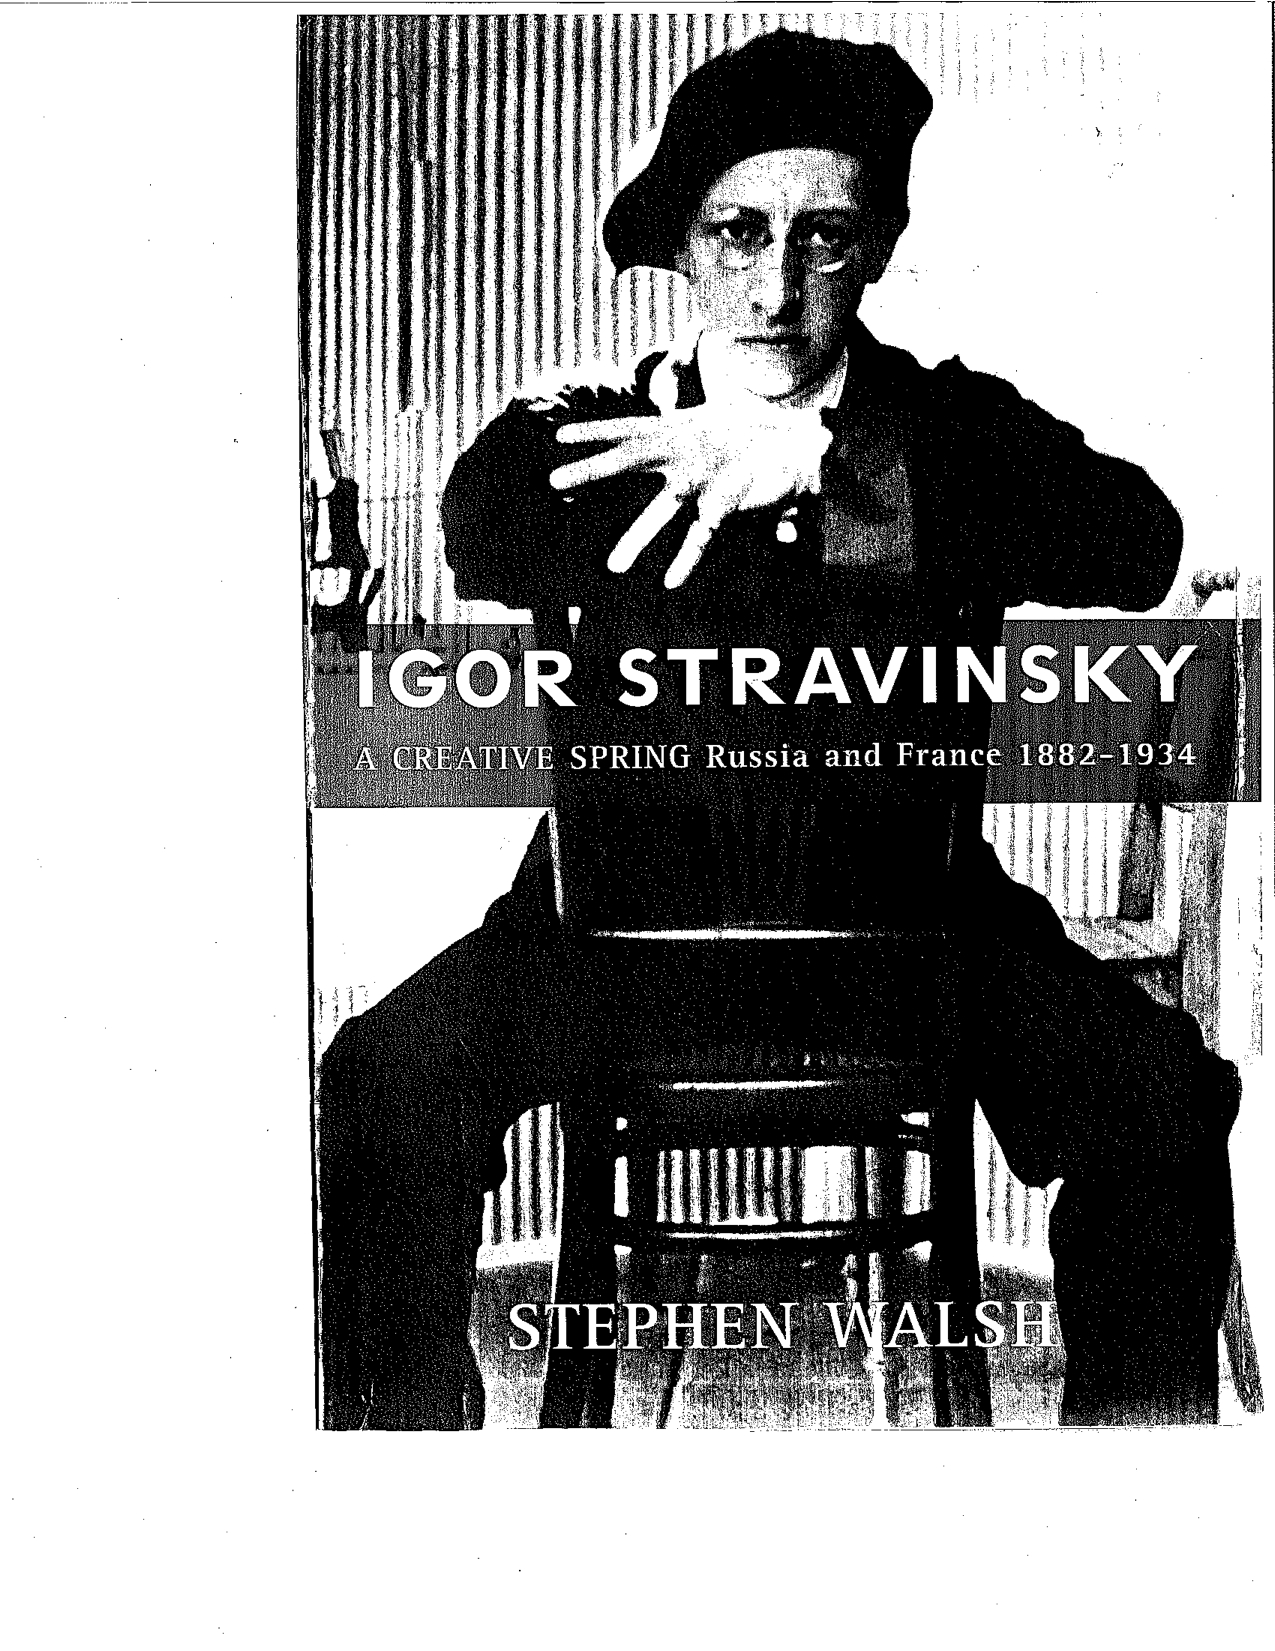 Remembering Stravinsky’s "The Rite of Spring" Lecture by Stephen Walsh